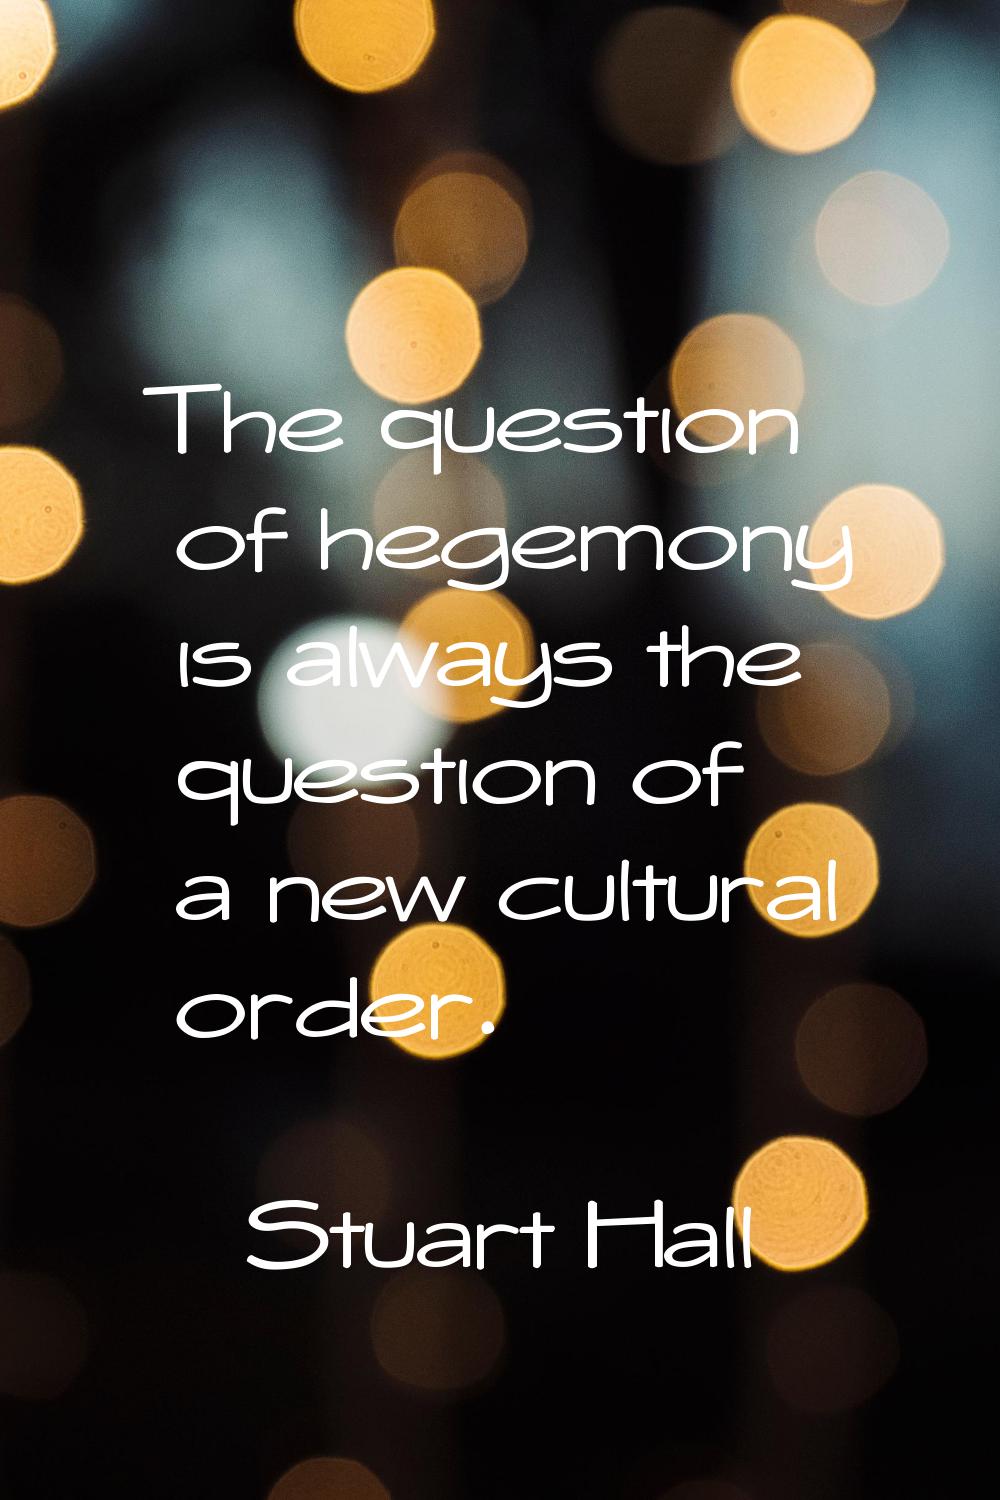 The question of hegemony is always the question of a new cultural order.